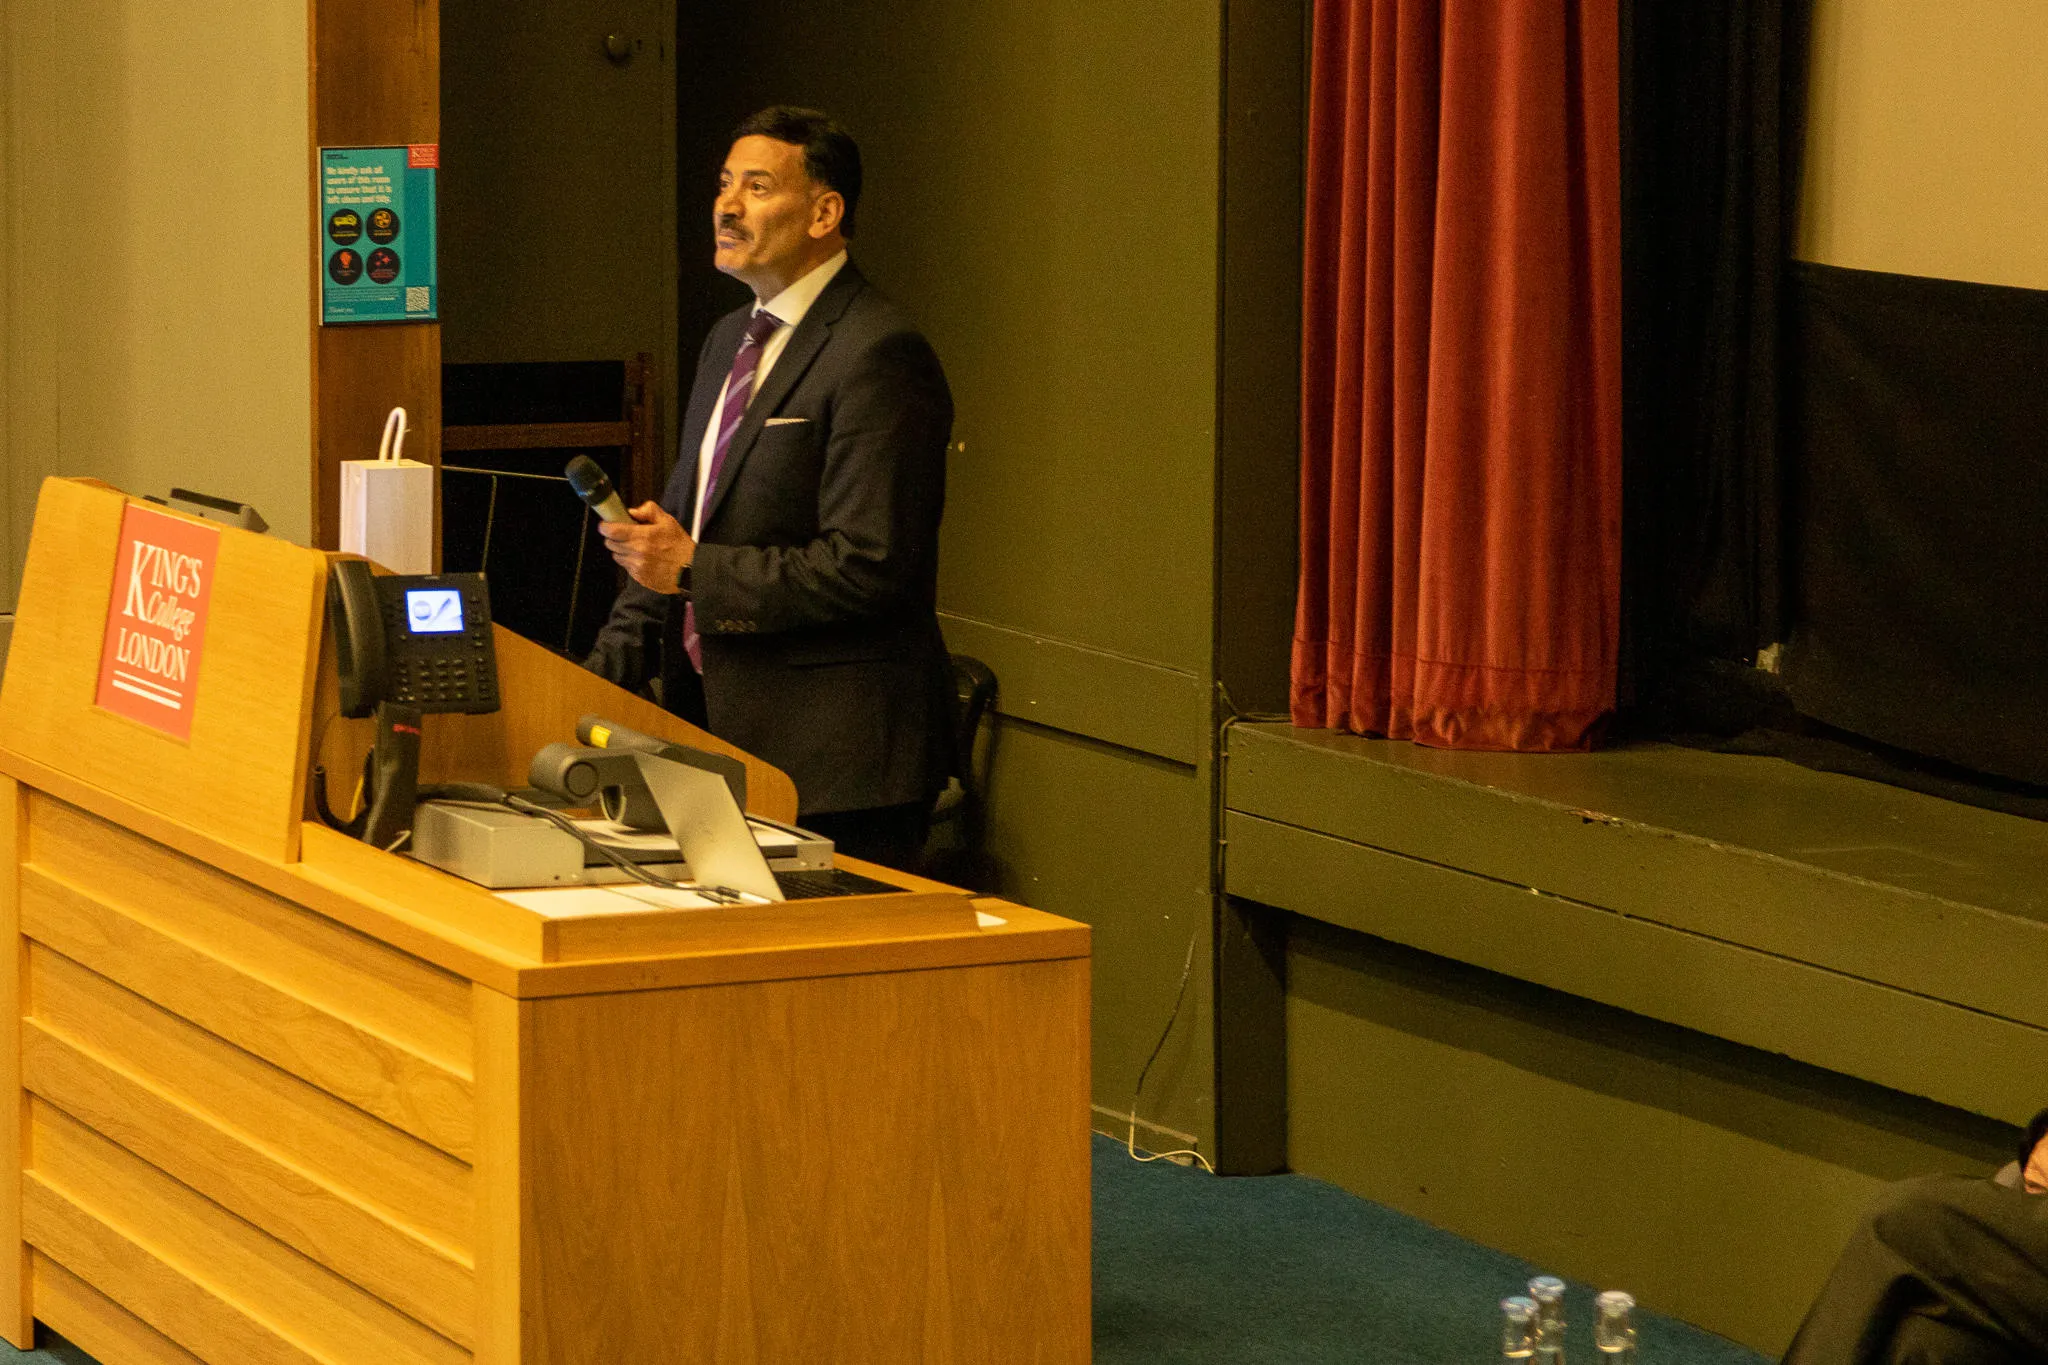 Professor Bashir M.  Al-Hashimi speaking to the audience at the Higgs Lecture 2022